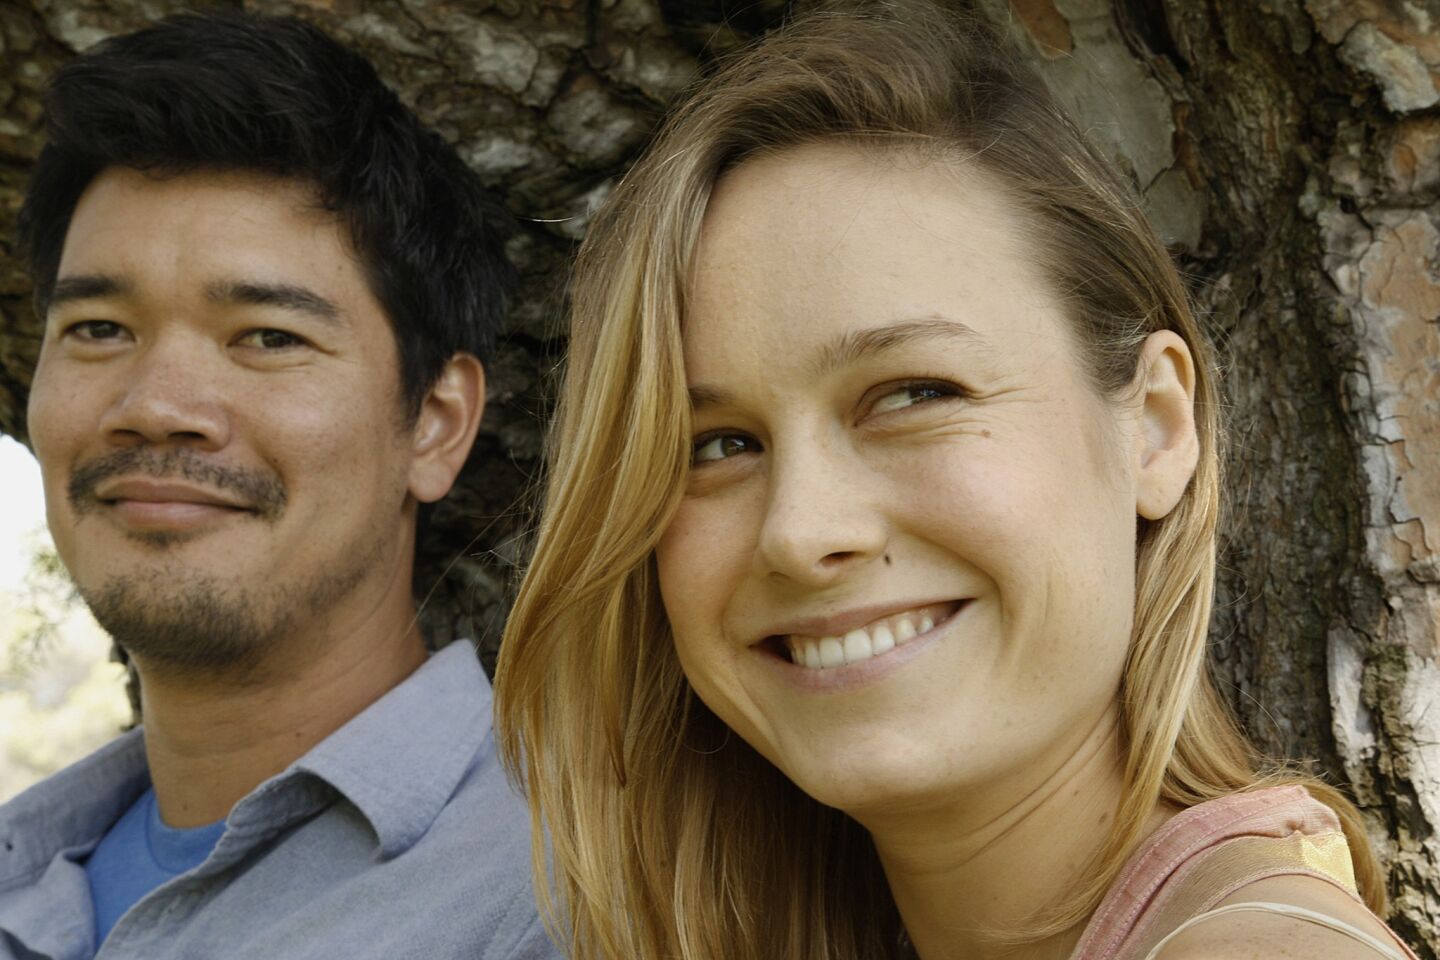 : A newcomer on DVD, this movie is a graceful reminder of all that's still right in independent cinema. Directed by Destin Daniel Cretton, the film looks at the tenderness of life in a foster care facility and its young staff, led by John Gallagher Jr. and Brie Larson (pictured with Cretton, left). In addition to revealing a system whose hopeful -- even heroic -- side often goes unseen, the film turns on the aching sweetness between its central couple, who have their own pasts to overcome.